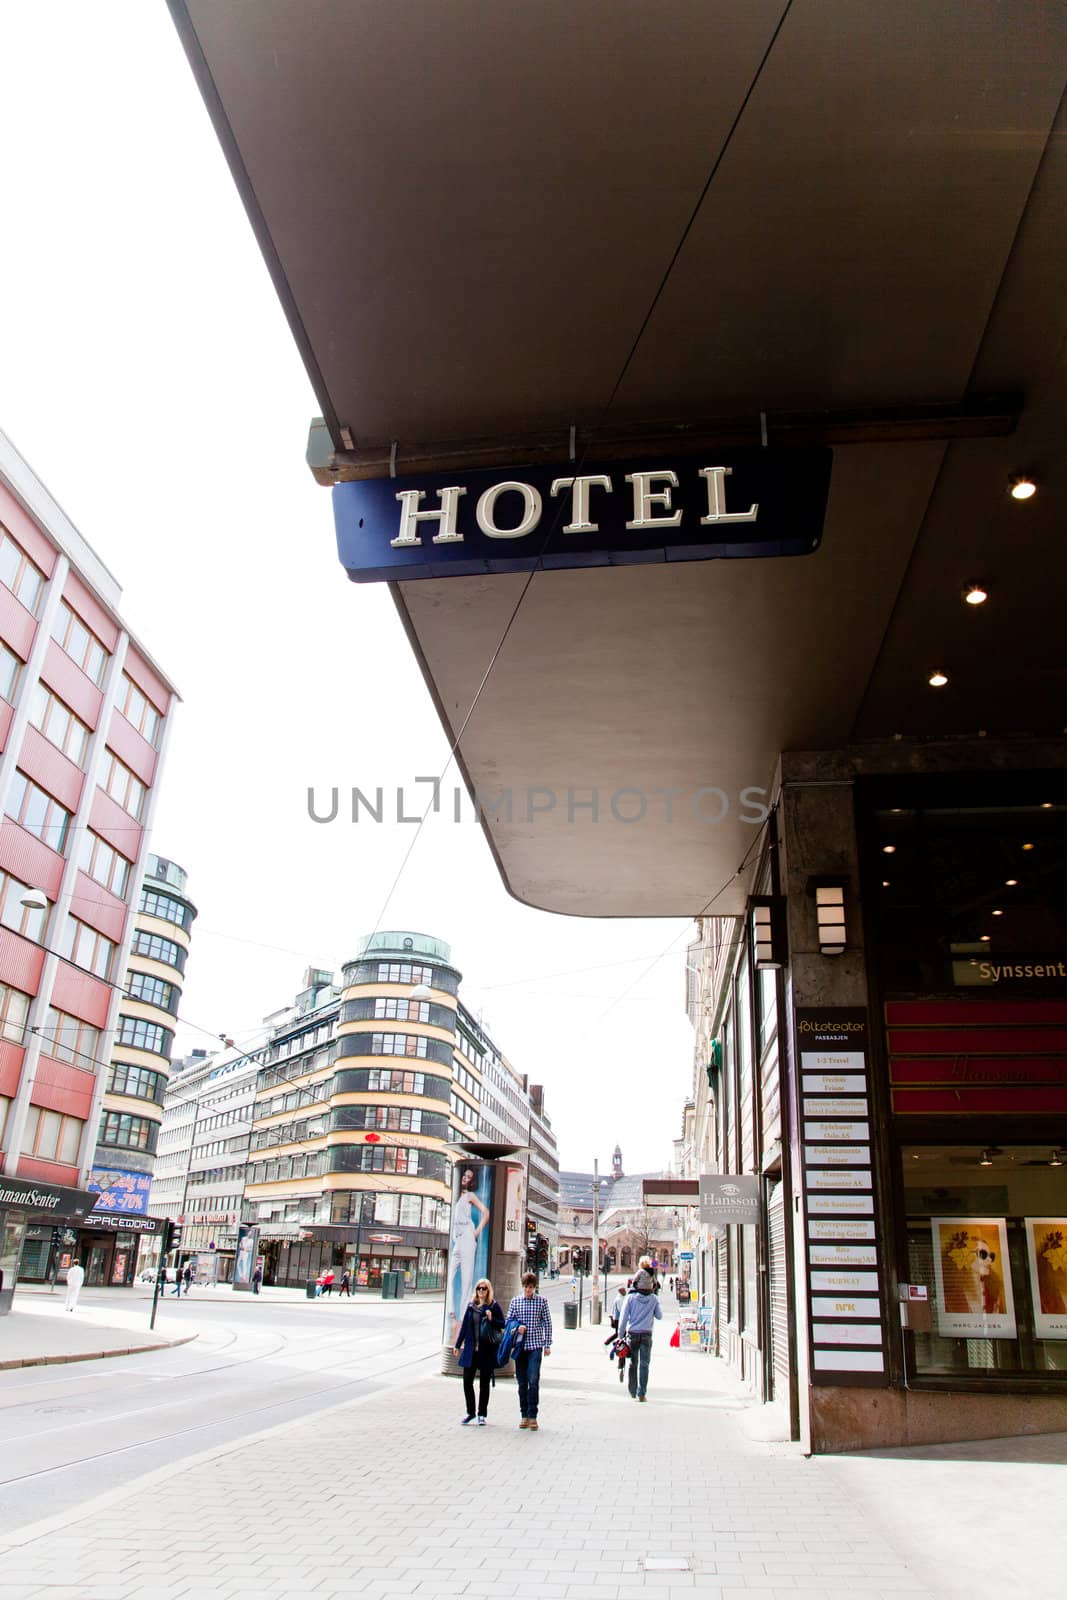 Hotel sign in city. The Background is over exposed to emphasise the hotel sign.